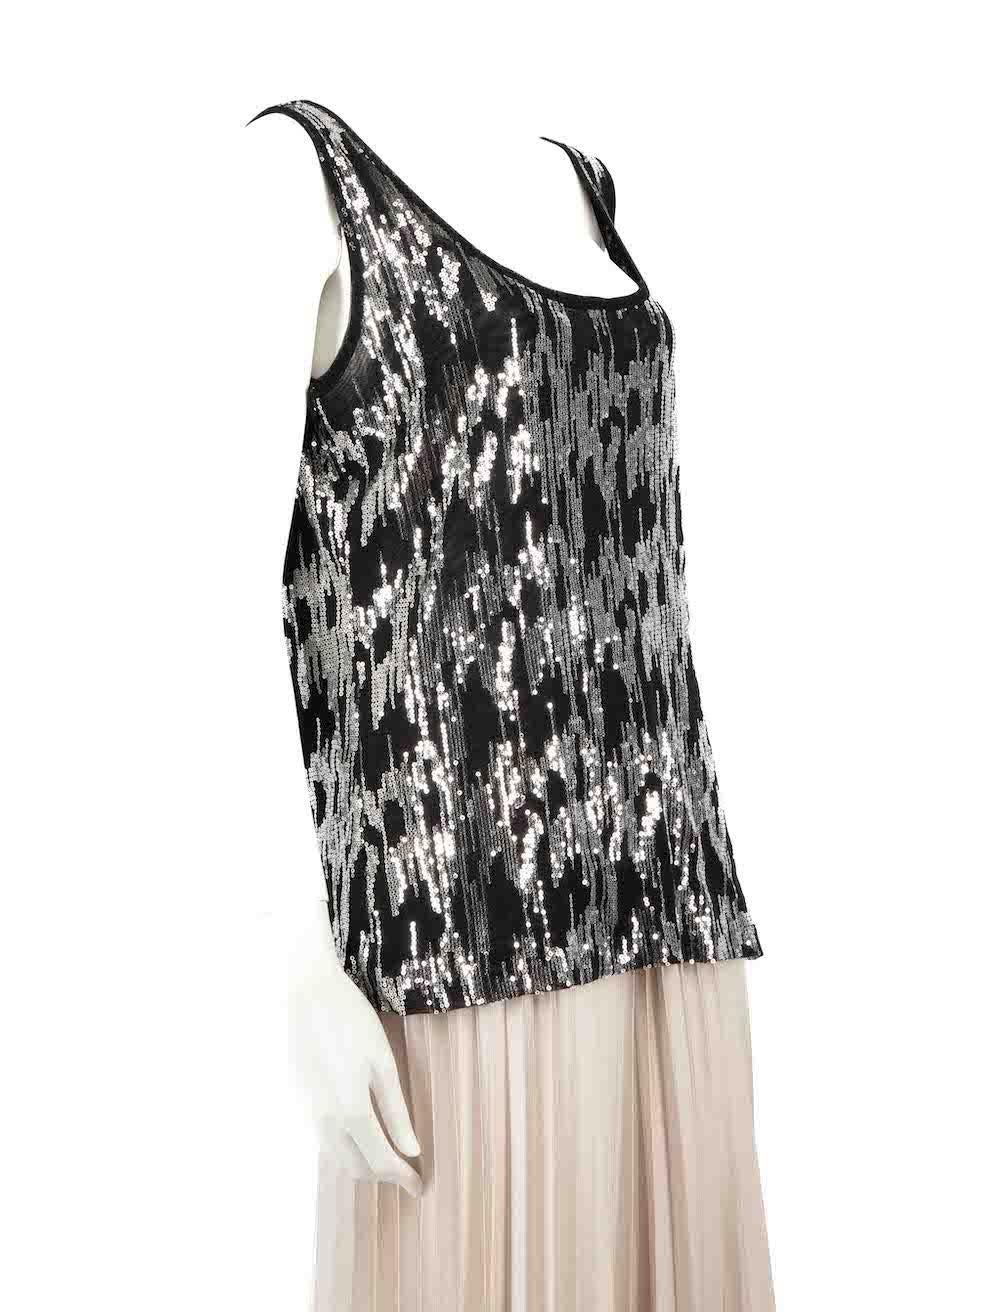 CONDITION is Very good. Hardly any visible wear to top is evident on this used Versace Collection designer resale item.
 
 
 
 Details
 
 
 Black
 
 Synthetic
 
 Top
 
 Silver sequin embellished
 
 Sleeveless
 
 Round neck
 
 
 
 
 
 
 
